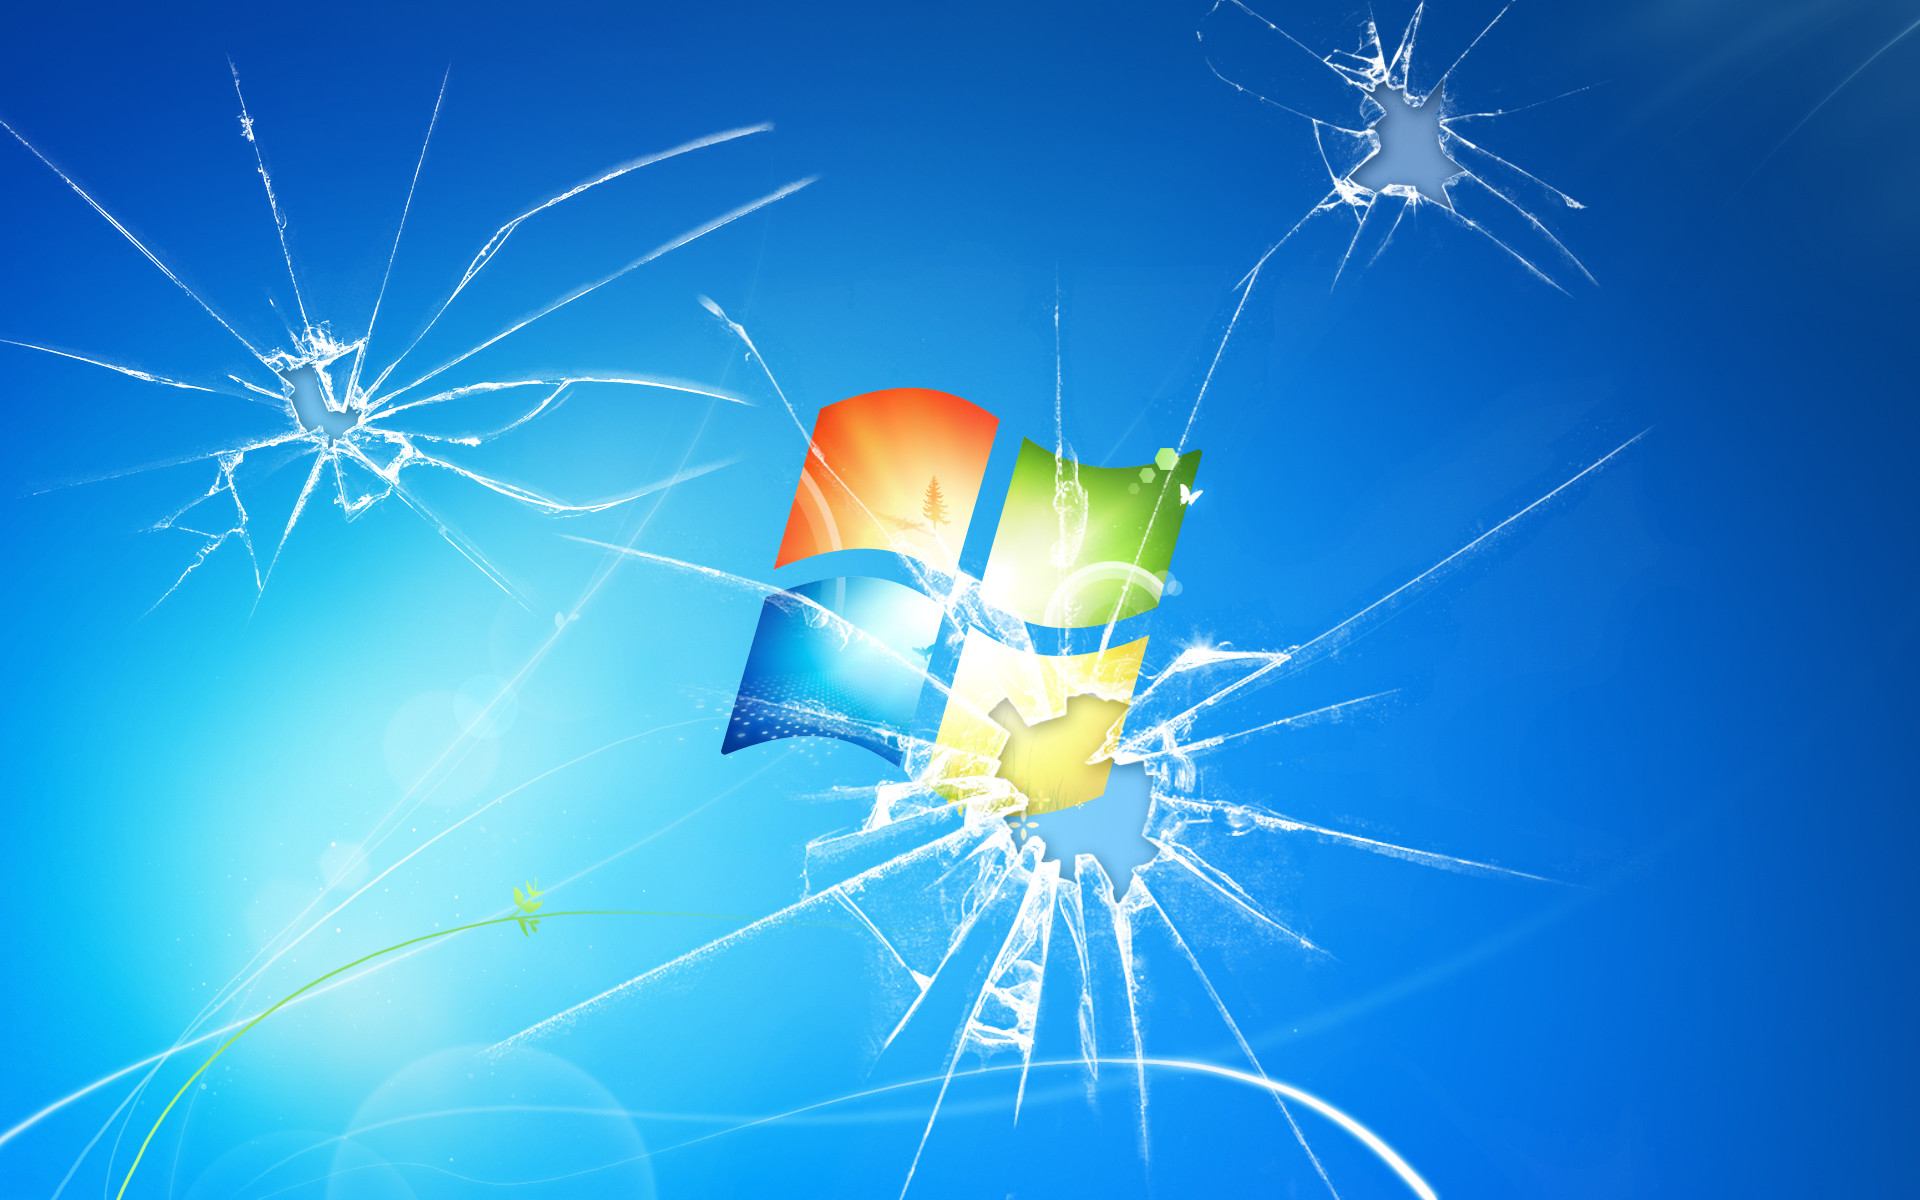 Download cracked screen wallpaper Free for Android  cracked screen  wallpaper APK Download  STEPrimocom